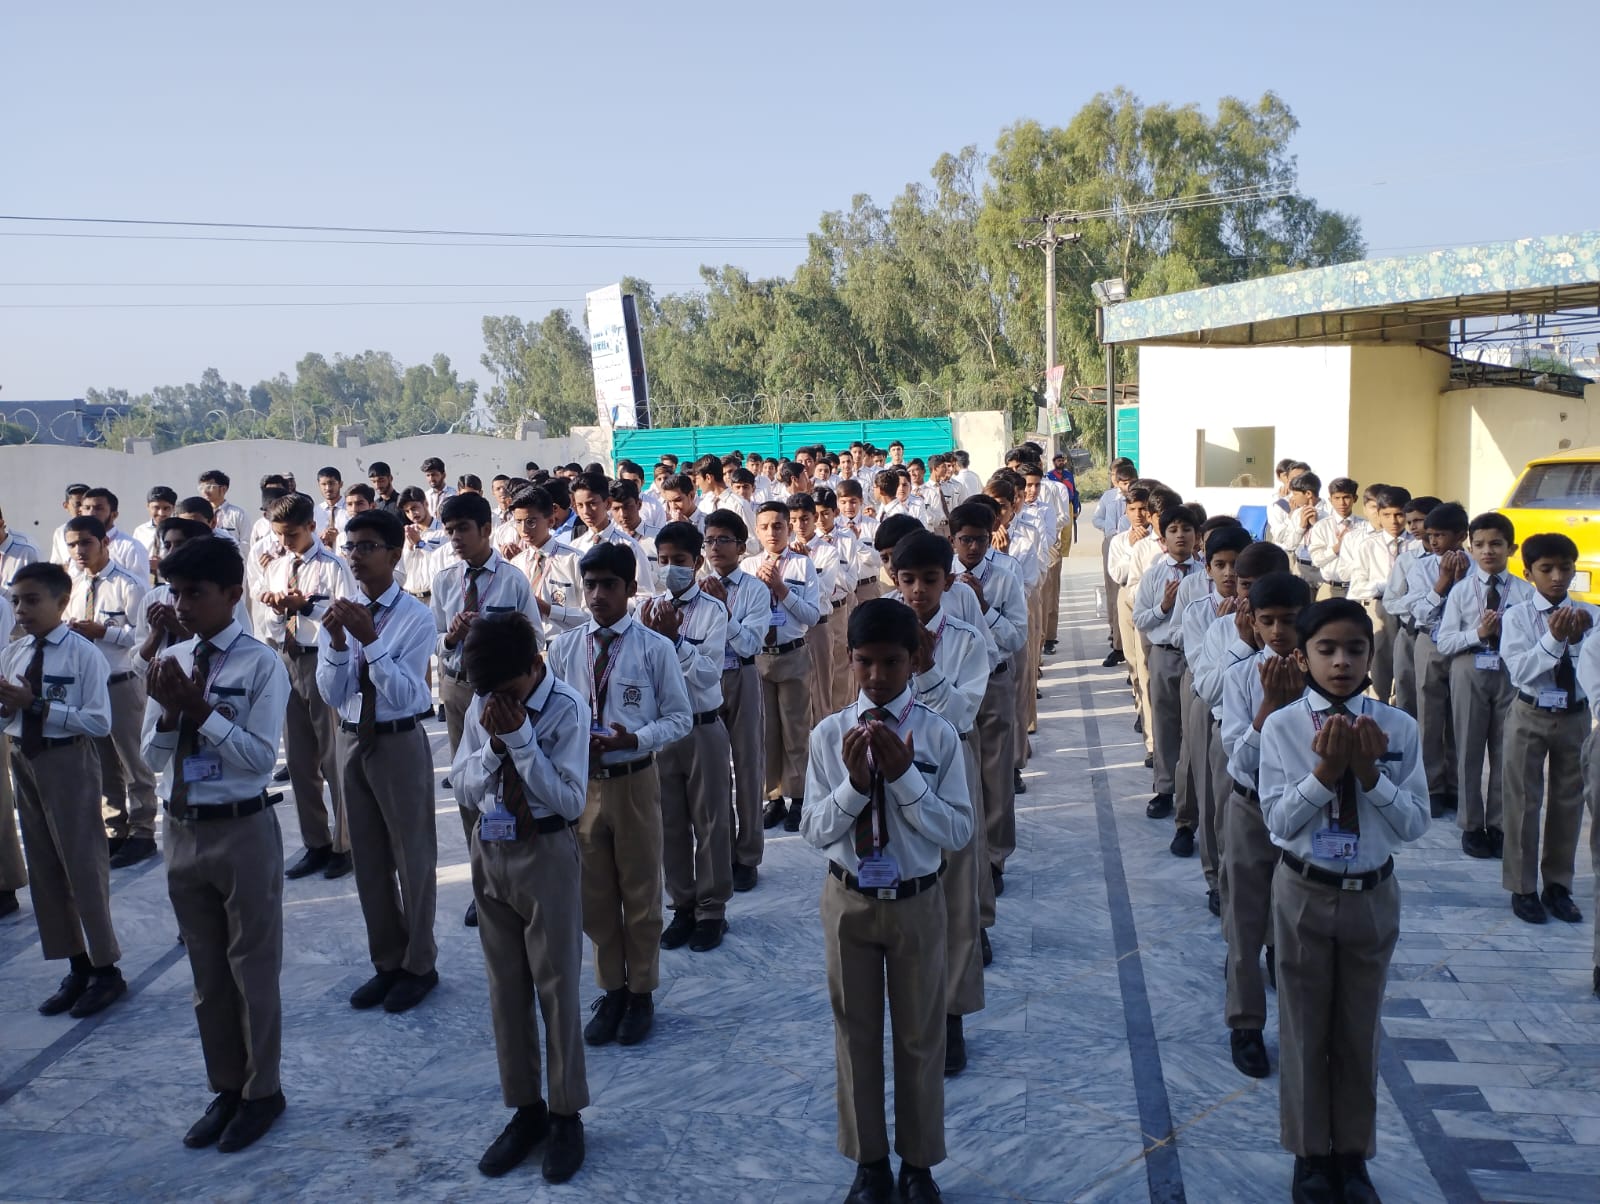 Alhamdulillah – Some random pictures from morning assemblies at Forces School Jauharabad Campus